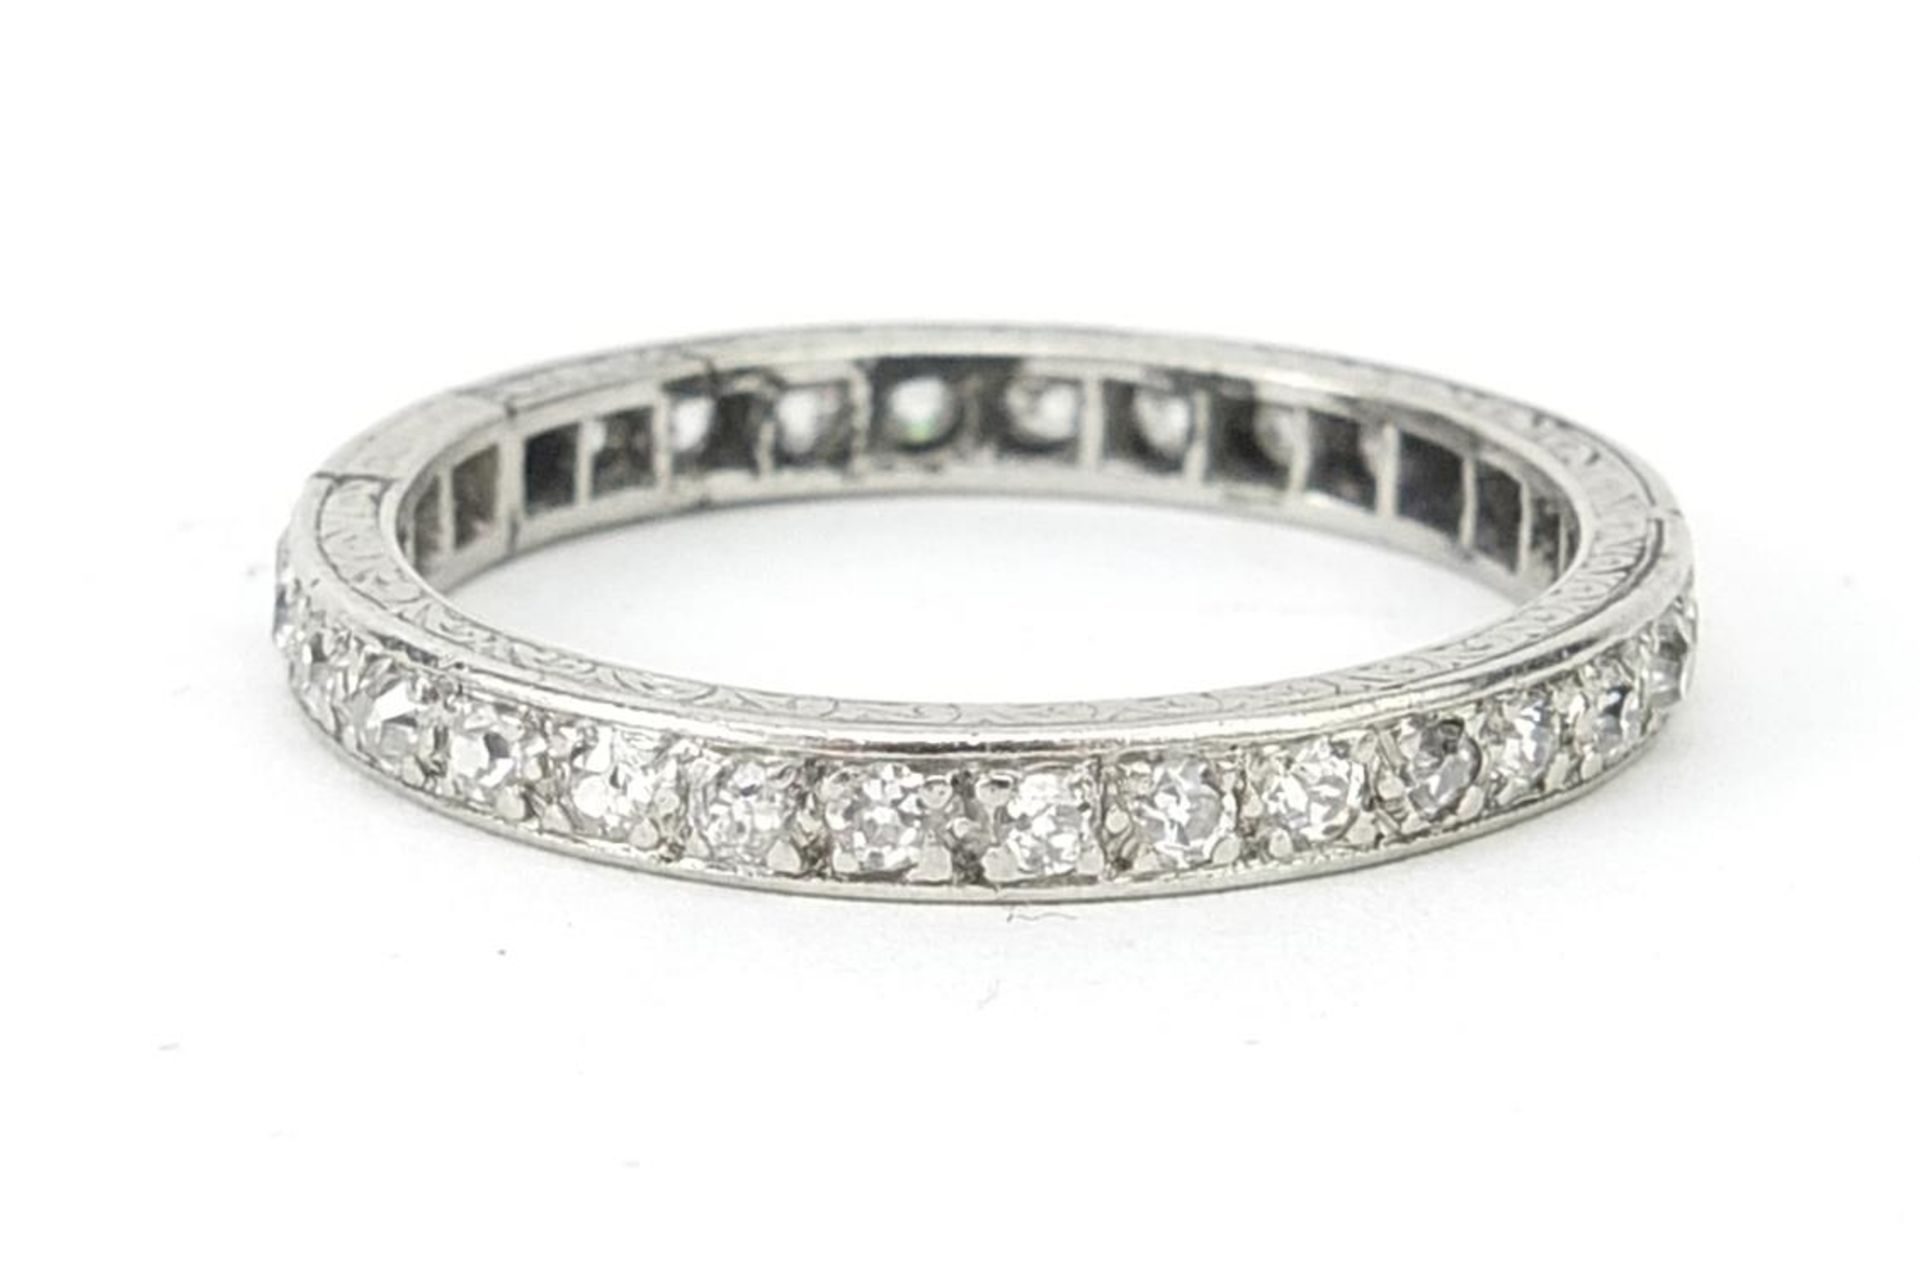 Unmarked white metal diamond eternity ring, the diamonds approximately 1.5mm in diameter, size S,